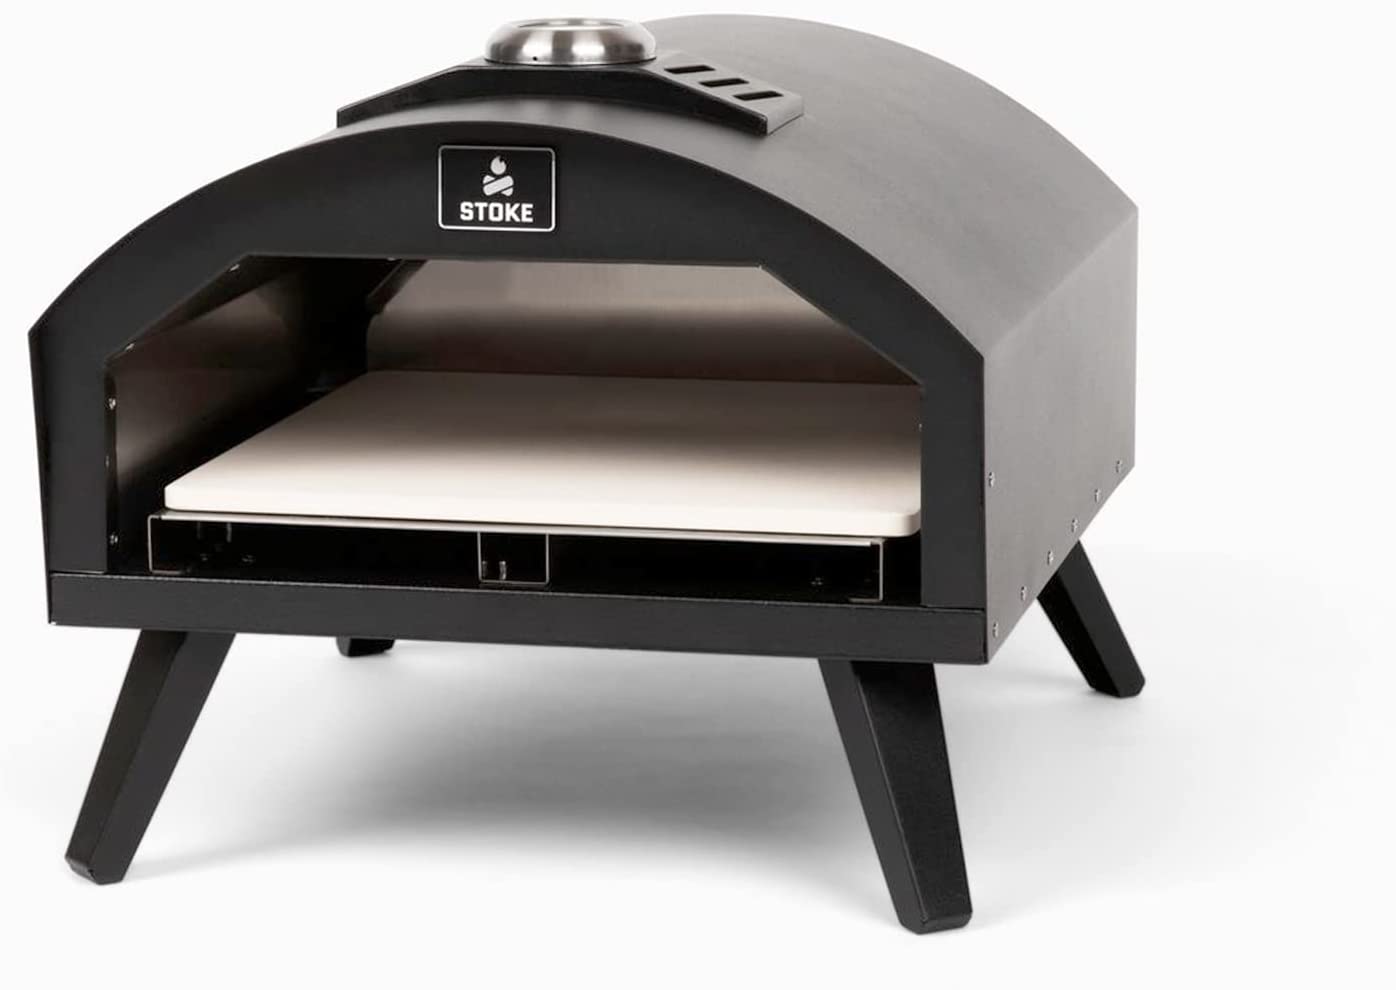 Stoke Gas Pizza Oven - Portable Outdoor Pizza Oven